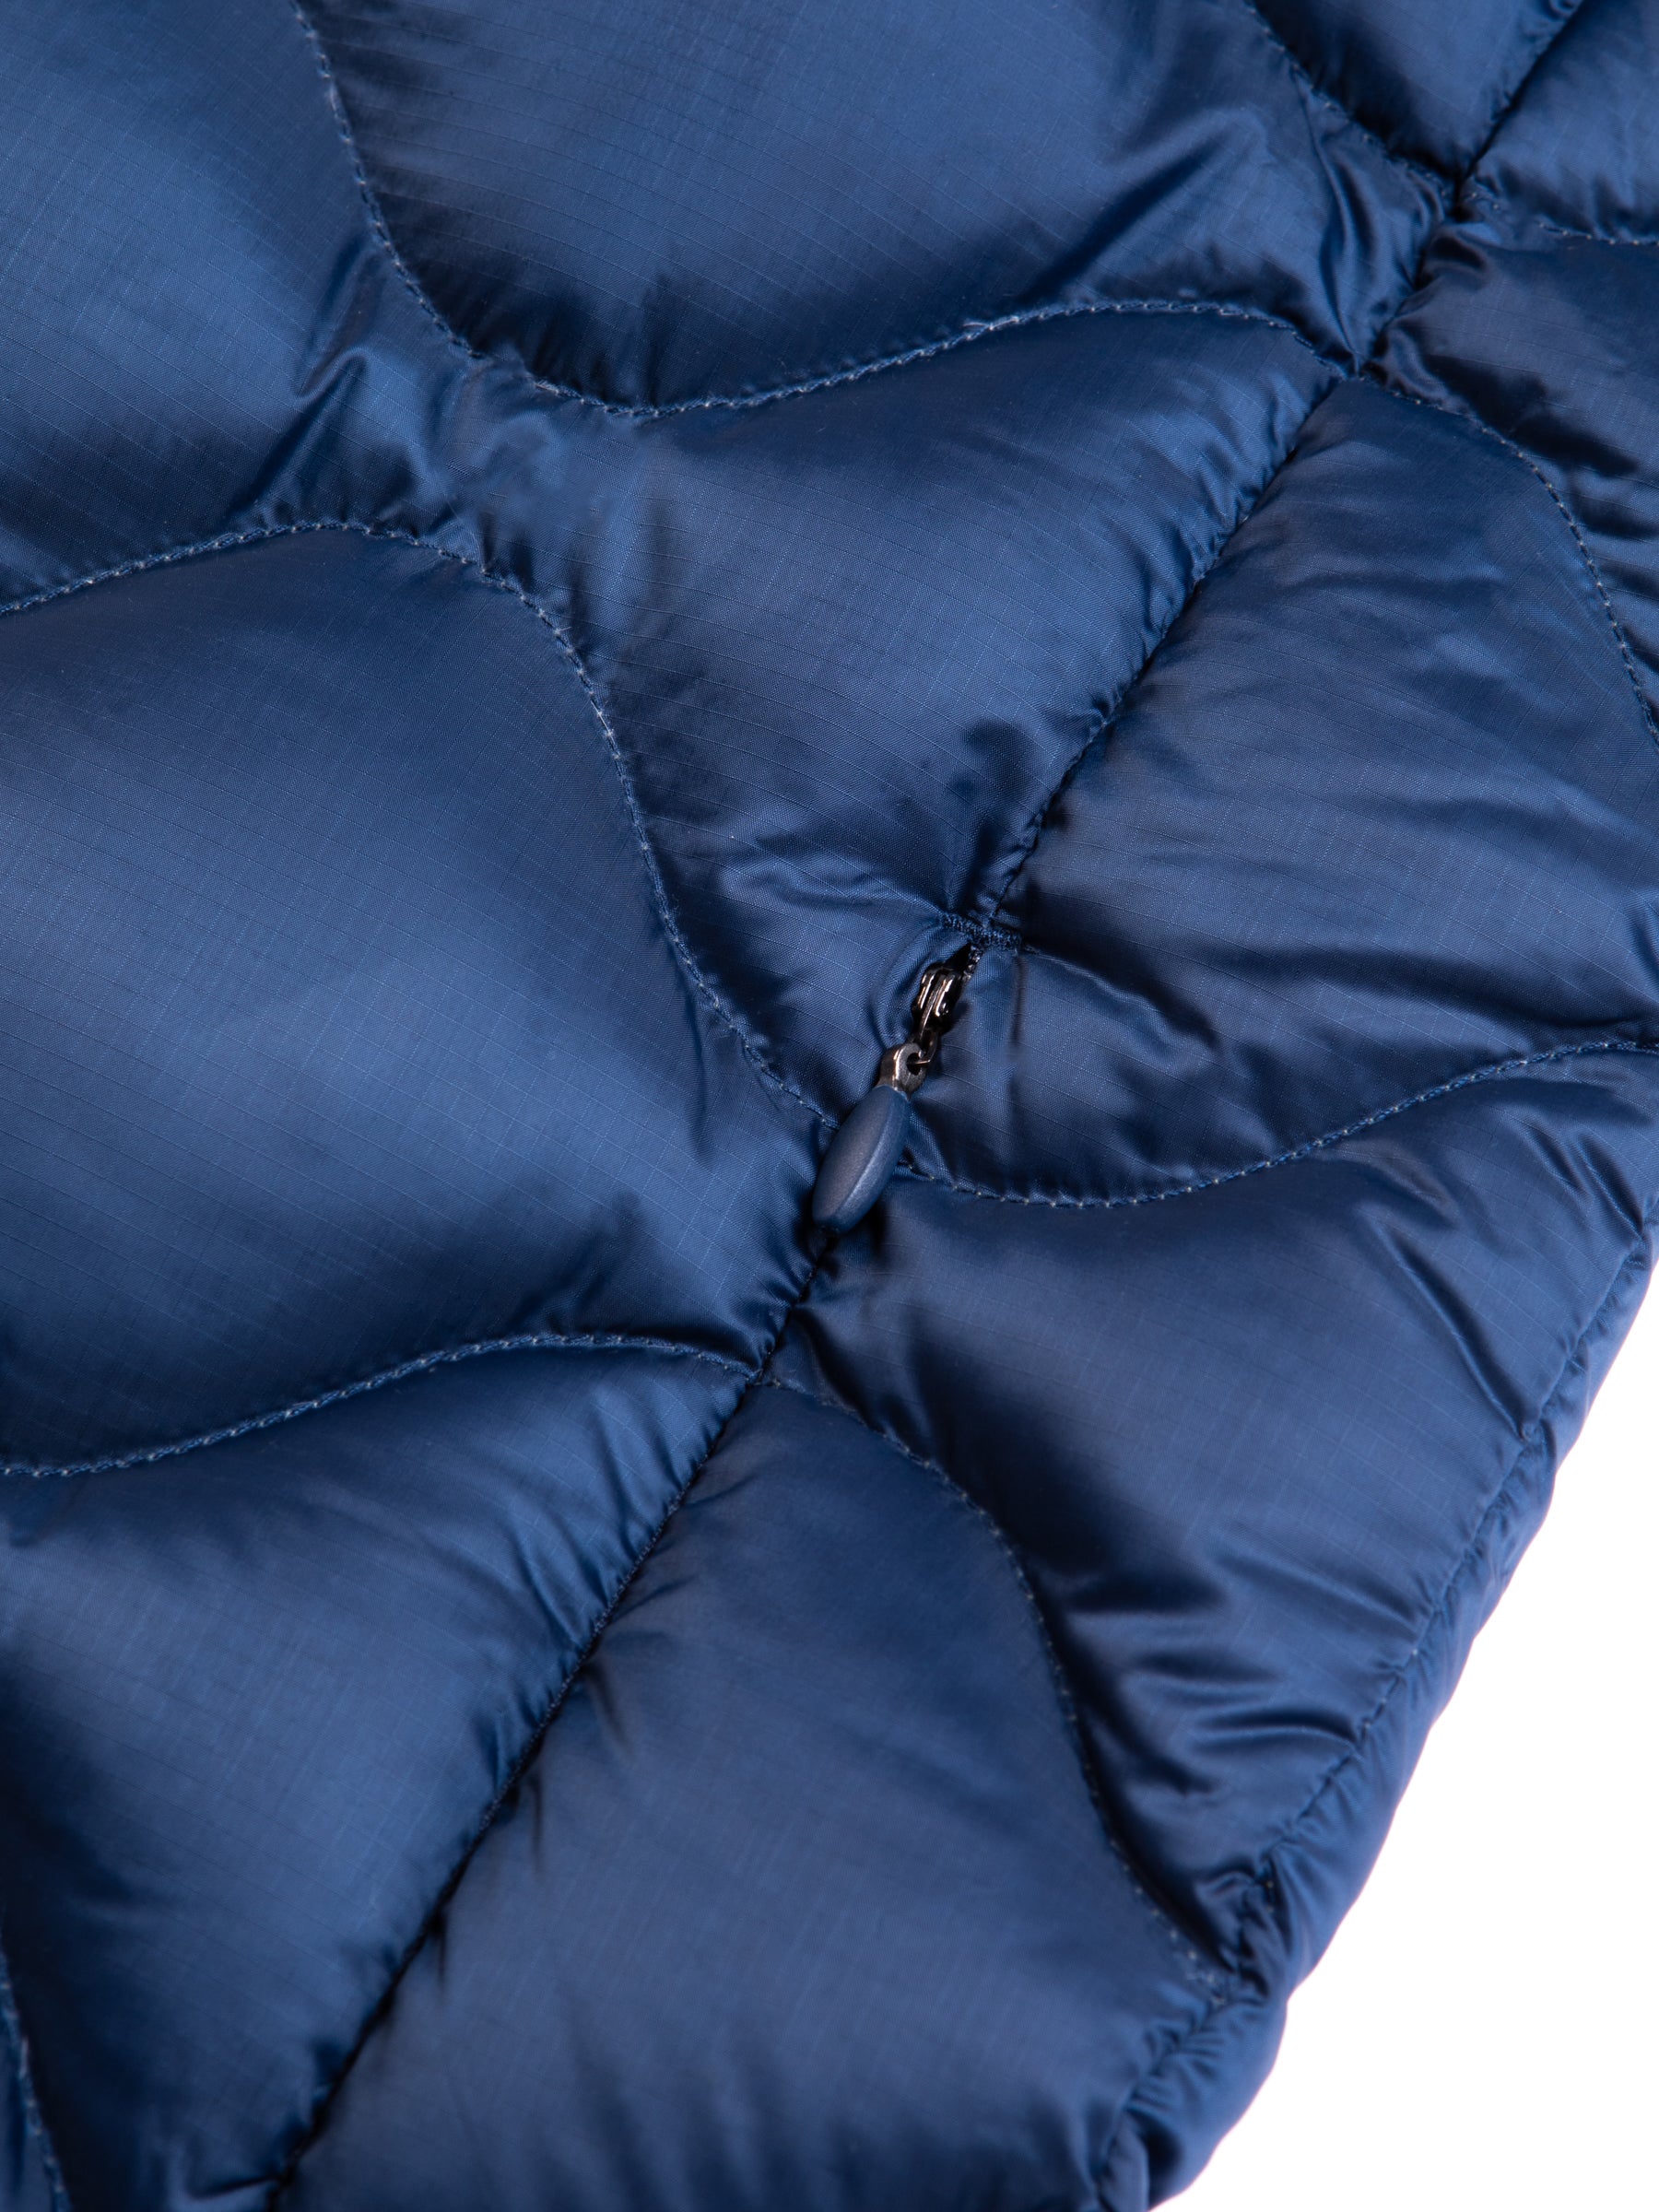 A zippered pocket on a blue quilted down jacket.